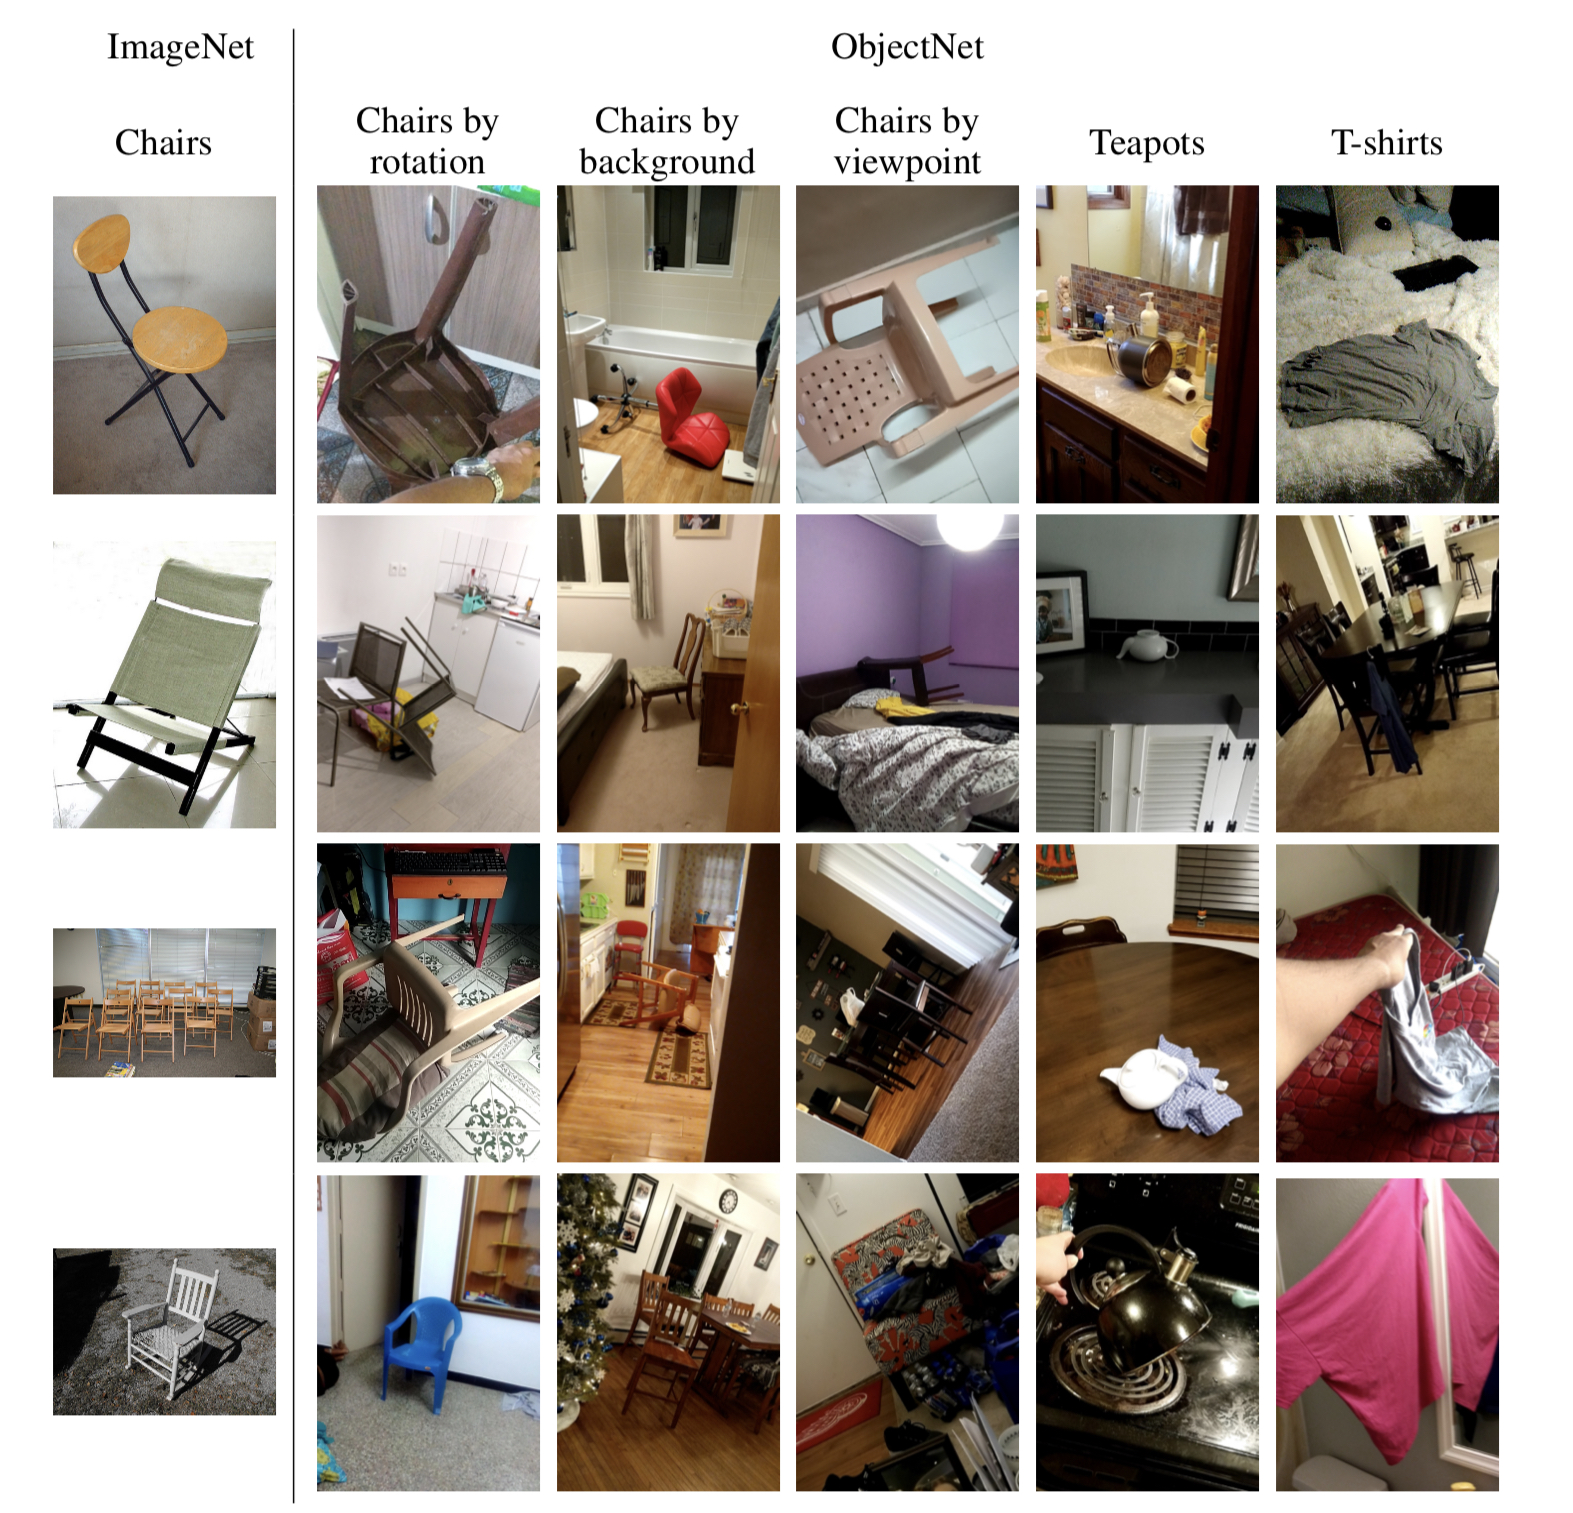 Barbu, et al (2019) “ObjectNet: A large-scale bias-controlled dataset for pushing the limits of object recognition models”